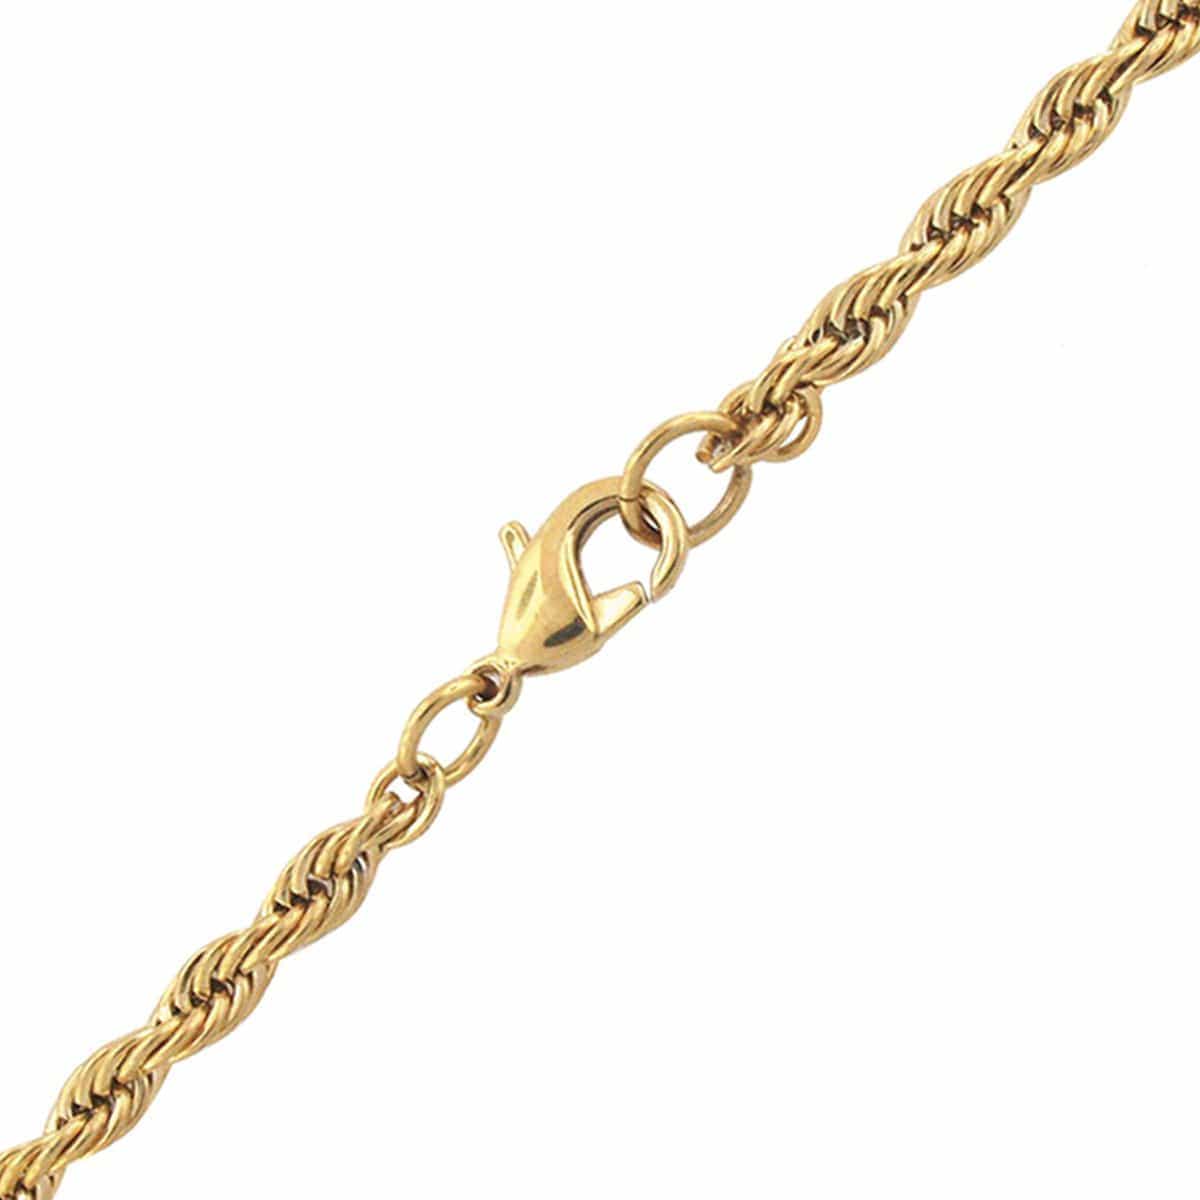 INOX JEWELRY Chains Golden Tone Stainless Steel Polished 3.5mm French Rope Chain